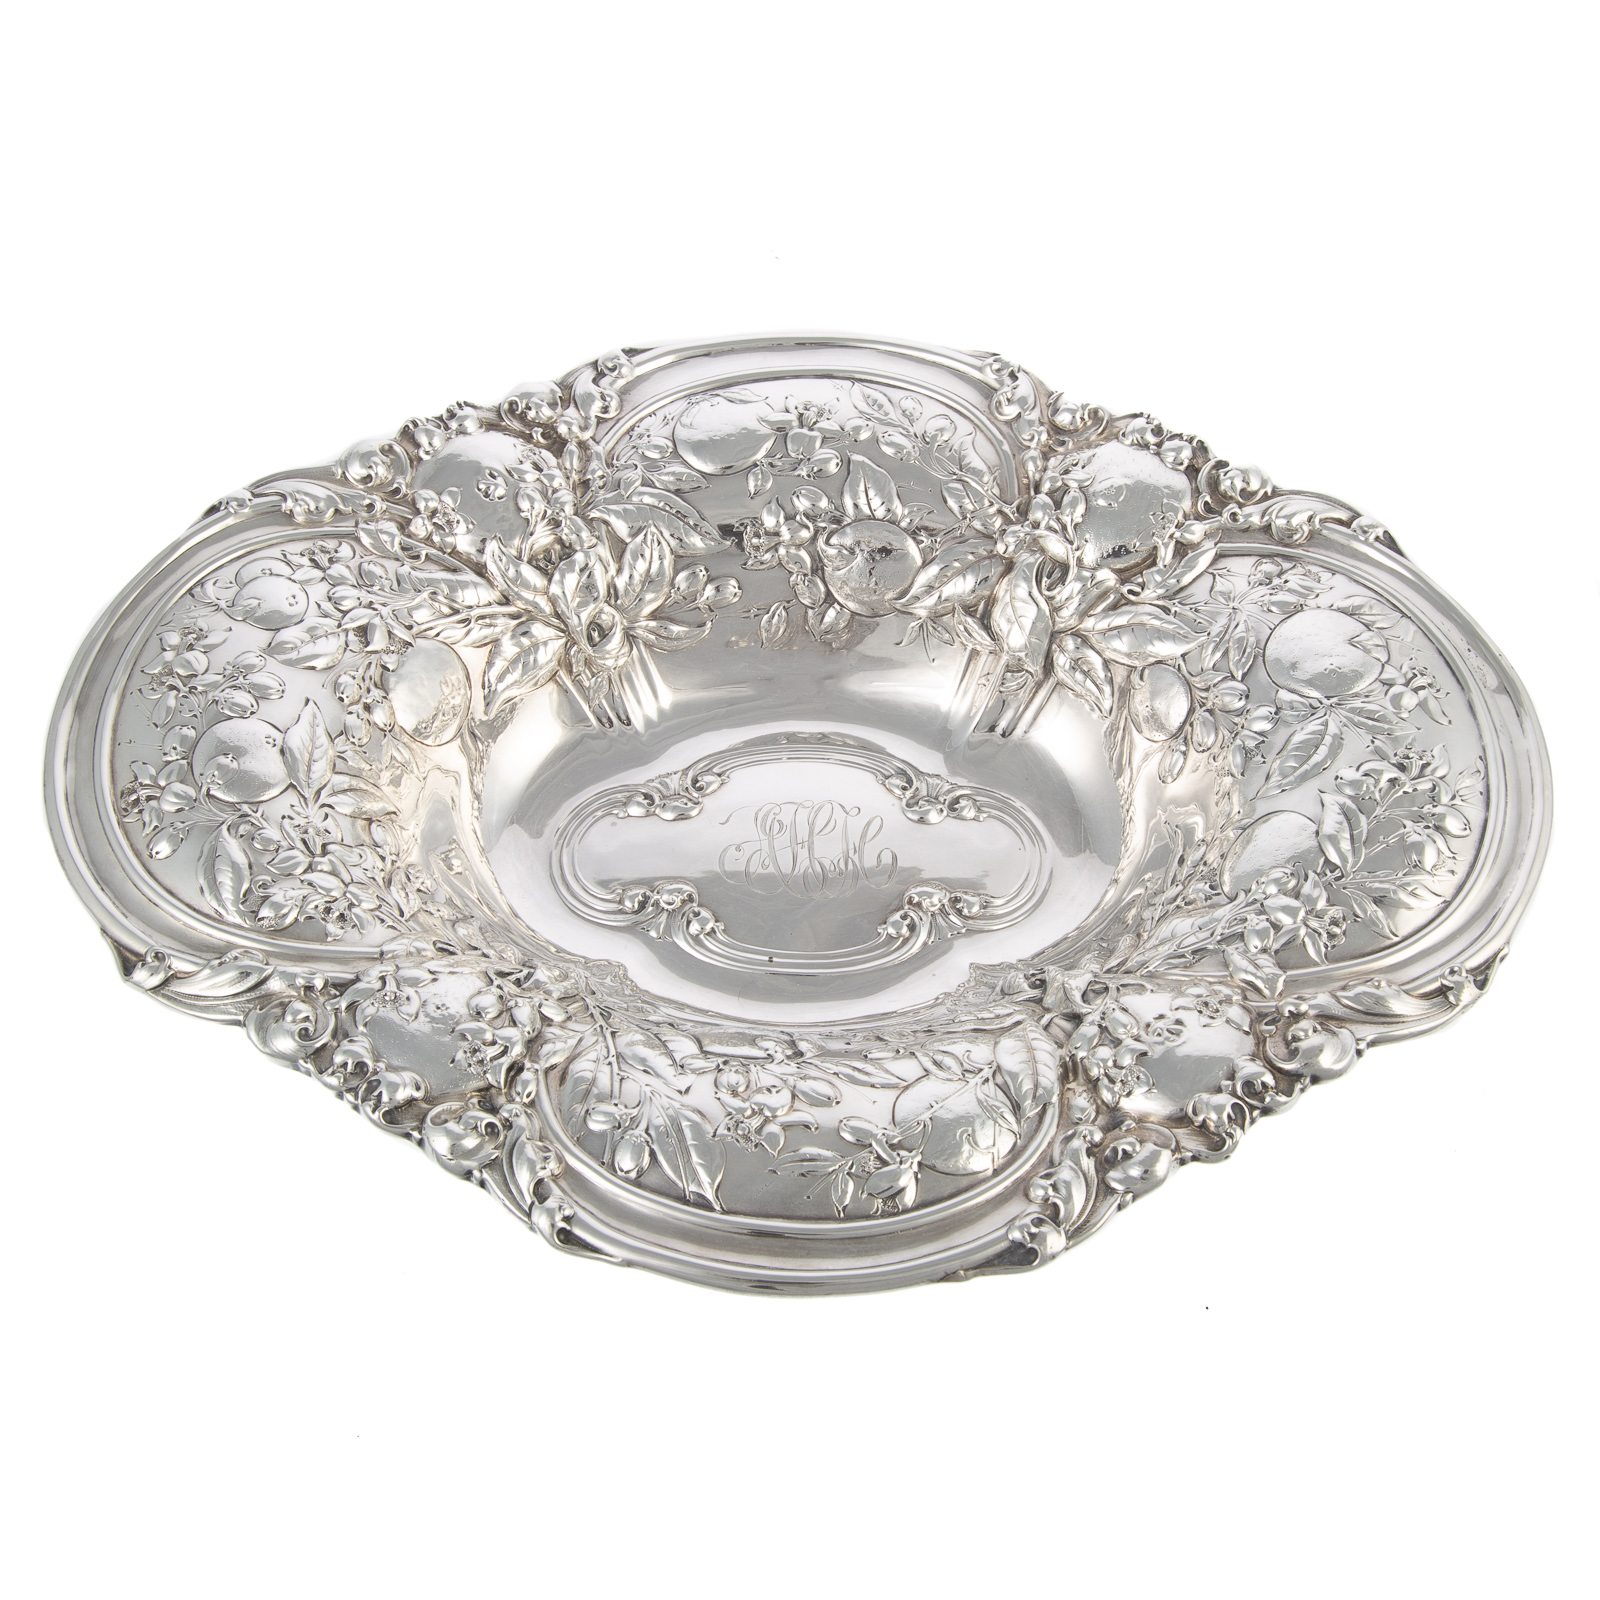 GORHAM STERLING REPOUSSE CENTERBOWL 2879ac